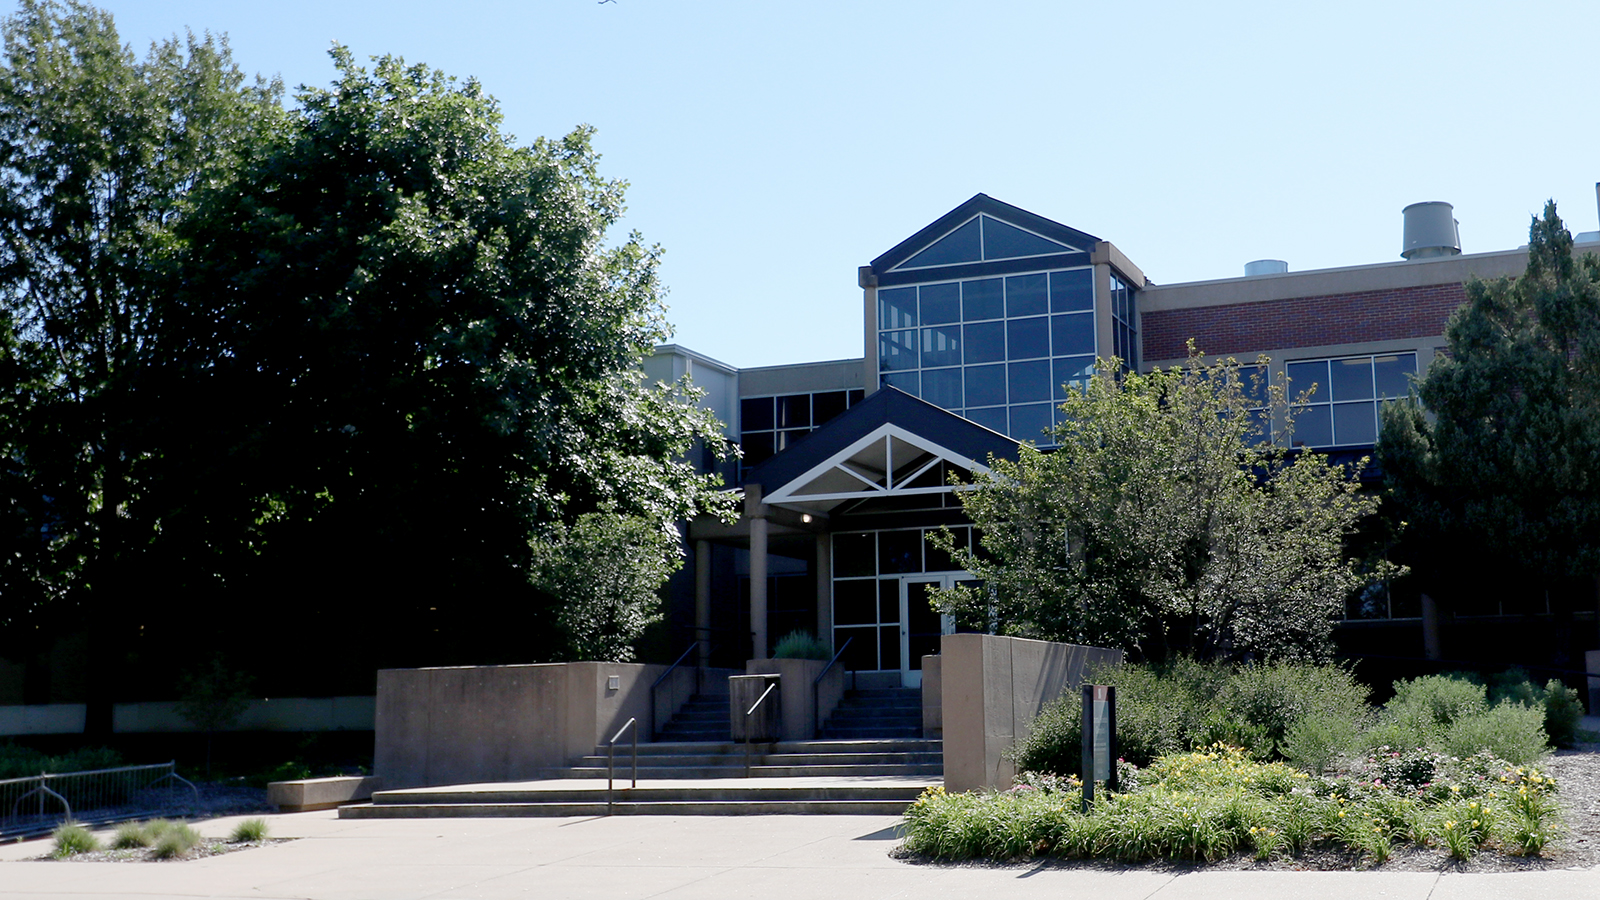 The Animal Science Complex at the University of Nebraska-Lincoln